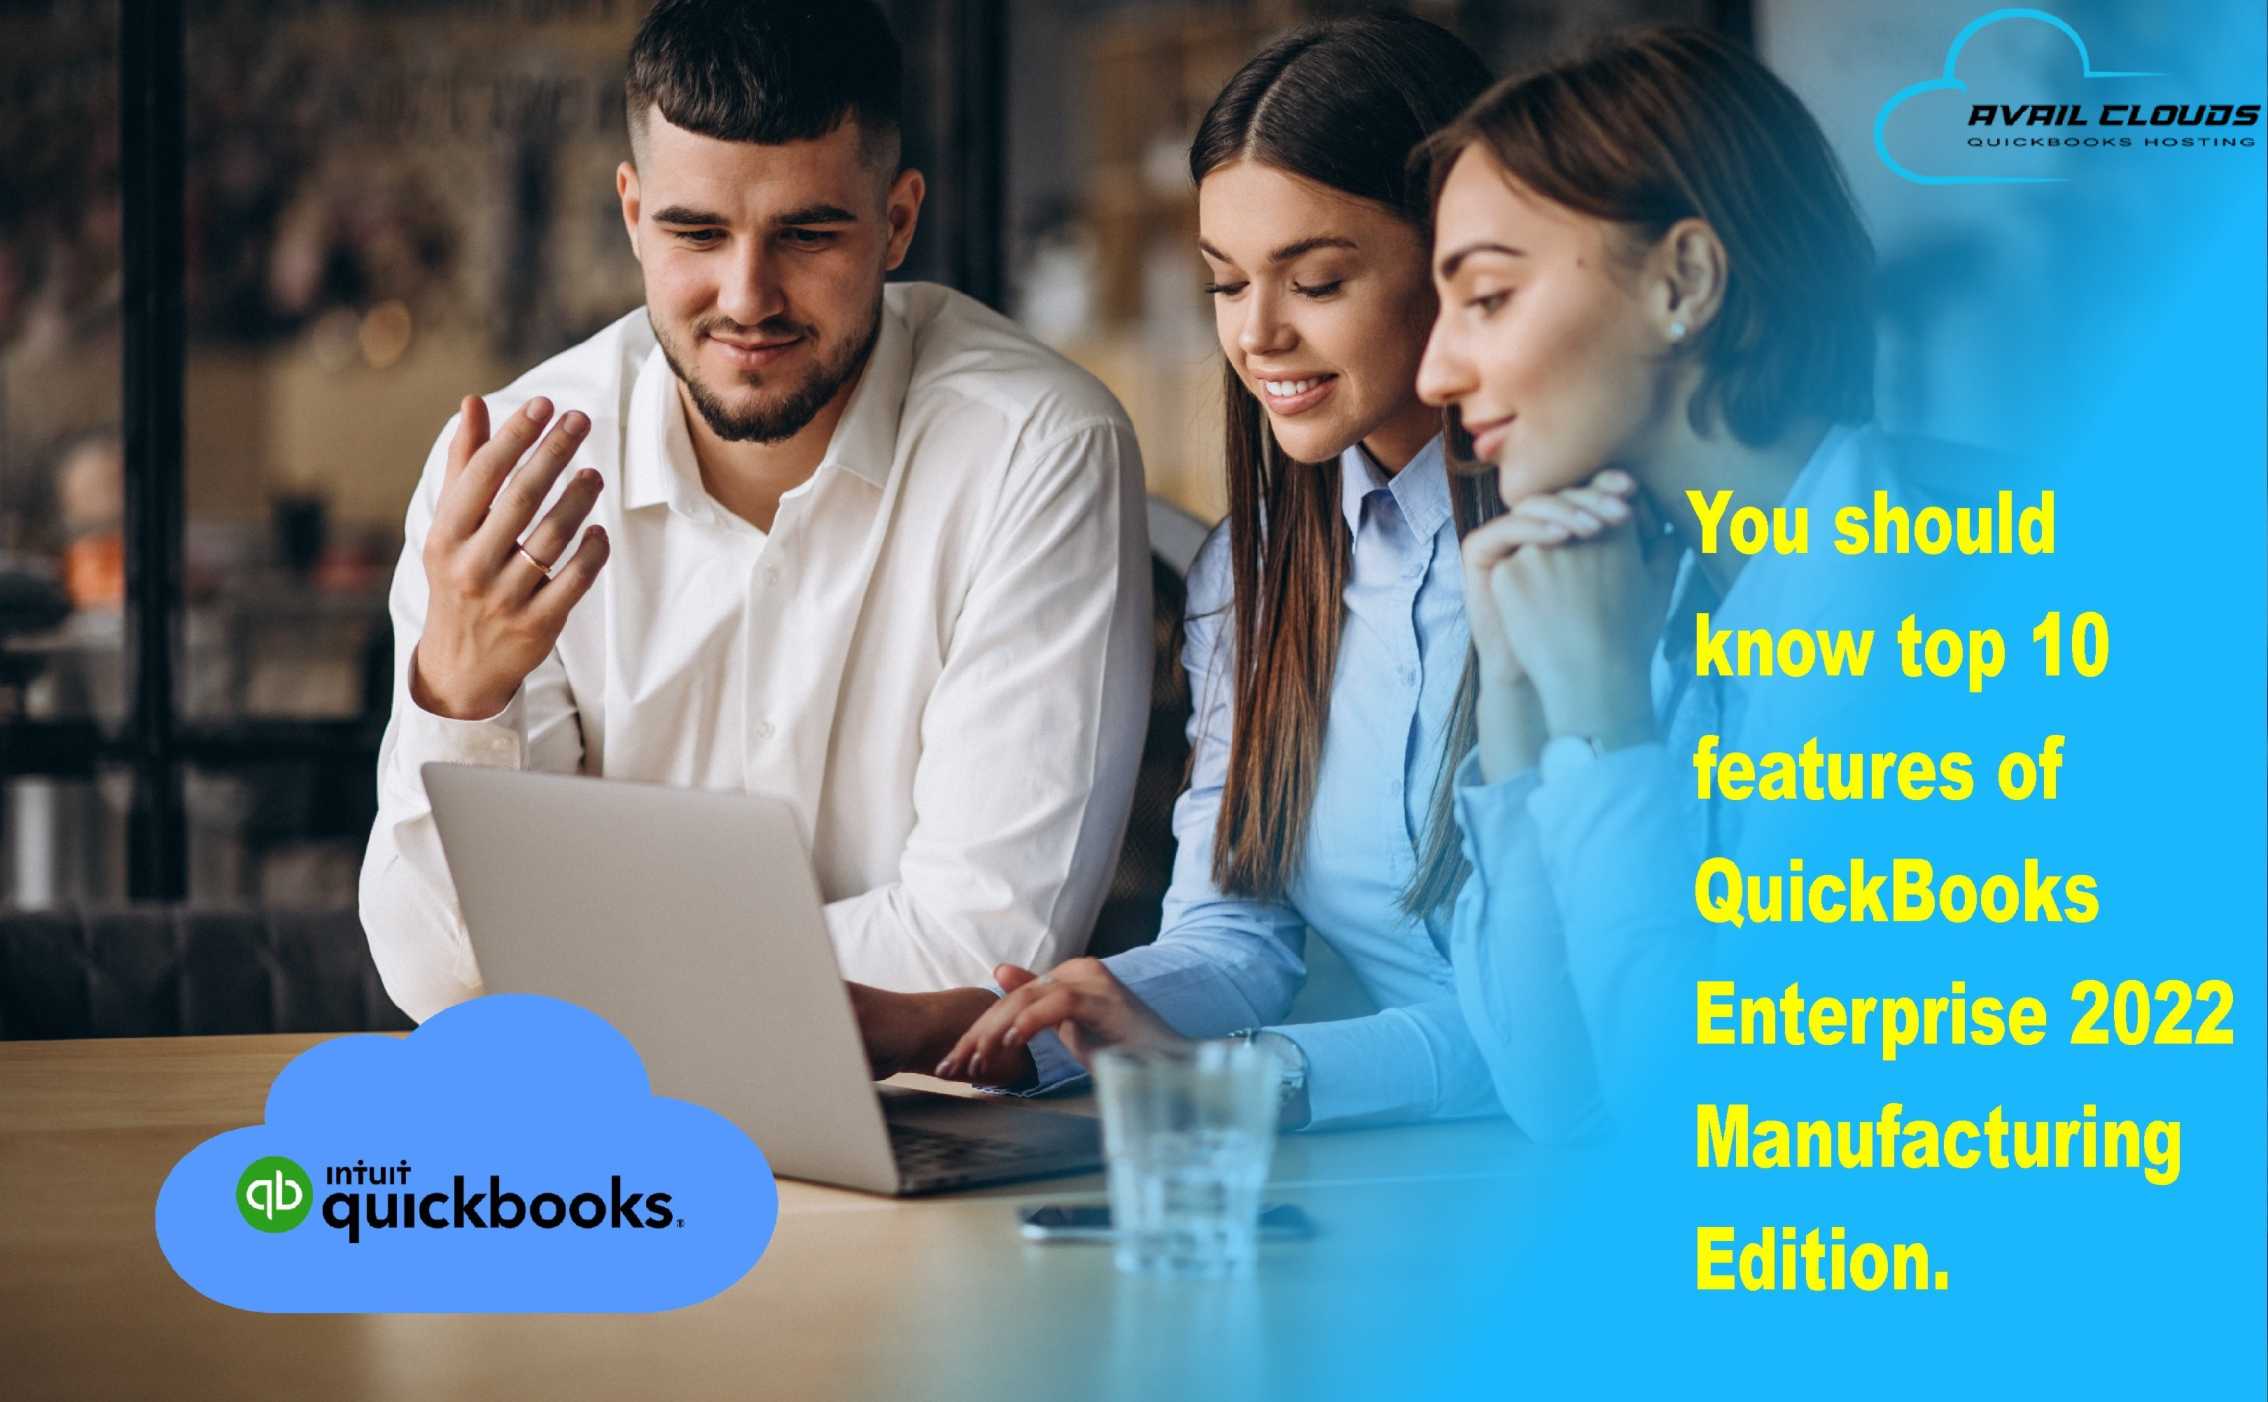 QuickBooks Hosting Availclouds